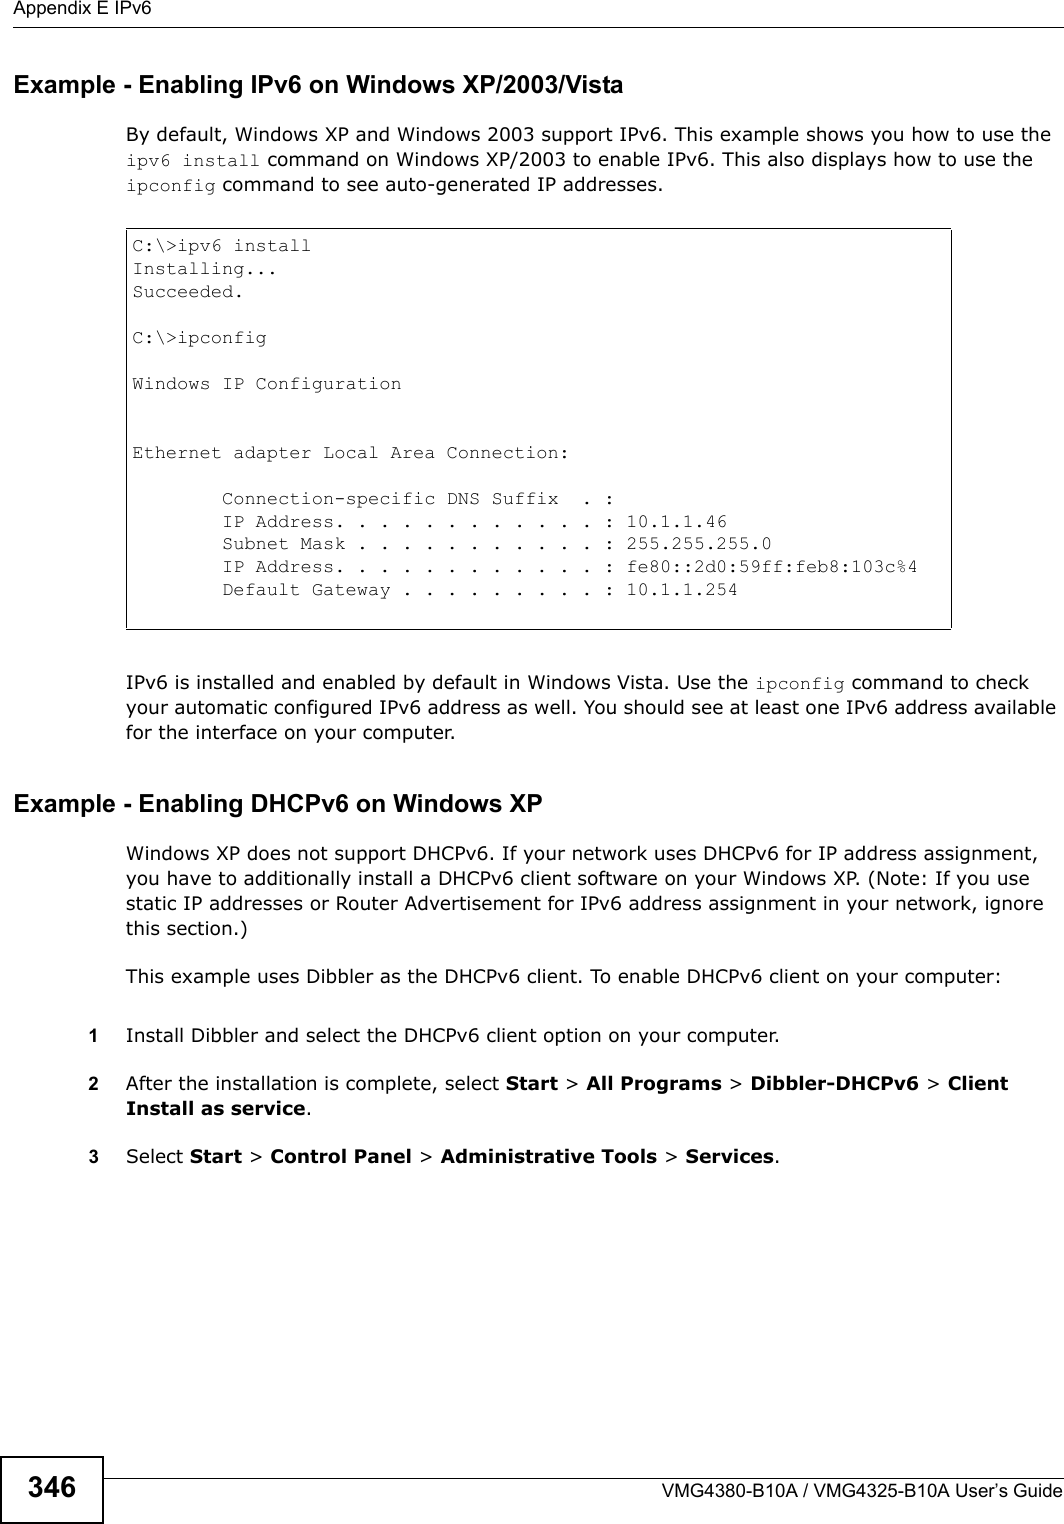 Appendix E IPv6VMG4380-B10A / VMG4325-B10A User’s Guide346Example - Enabling IPv6 on Windows XP/2003/VistaBy default, Windows XP and Windows 2003 support IPv6. This example shows you how to use the ipv6 install command on Windows XP/2003 to enable IPv6. This also displays how to use the ipconfig command to see auto-generated IP addresses.IPv6 is installed and enabled by default in Windows Vista. Use the ipconfig command to check your automatic configured IPv6 address as well. You should see at least one IPv6 address available for the interface on your computer.Example - Enabling DHCPv6 on Windows XPWindows XP does not support DHCPv6. If your network uses DHCPv6 for IP address assignment, you have to additionally install a DHCPv6 client software on your Windows XP. (Note: If you use static IP addresses or Router Advertisement for IPv6 address assignment in your network, ignore this section.)This example uses Dibbler as the DHCPv6 client. To enable DHCPv6 client on your computer:1Install Dibbler and select the DHCPv6 client option on your computer.2After the installation is complete, select Start &gt; All Programs &gt; Dibbler-DHCPv6 &gt; Client Install as service.3Select Start &gt; Control Panel &gt; Administrative Tools &gt; Services.C:\&gt;ipv6 installInstalling...Succeeded.C:\&gt;ipconfigWindows IP ConfigurationEthernet adapter Local Area Connection:        Connection-specific DNS Suffix  . :      IP Address. . . . . . . . . . . . : 10.1.1.46        Subnet Mask . . . . . . . . . . . : 255.255.255.0        IP Address. . . . . . . . . . . . : fe80::2d0:59ff:feb8:103c%4     Default Gateway . . . . . . . . . : 10.1.1.254